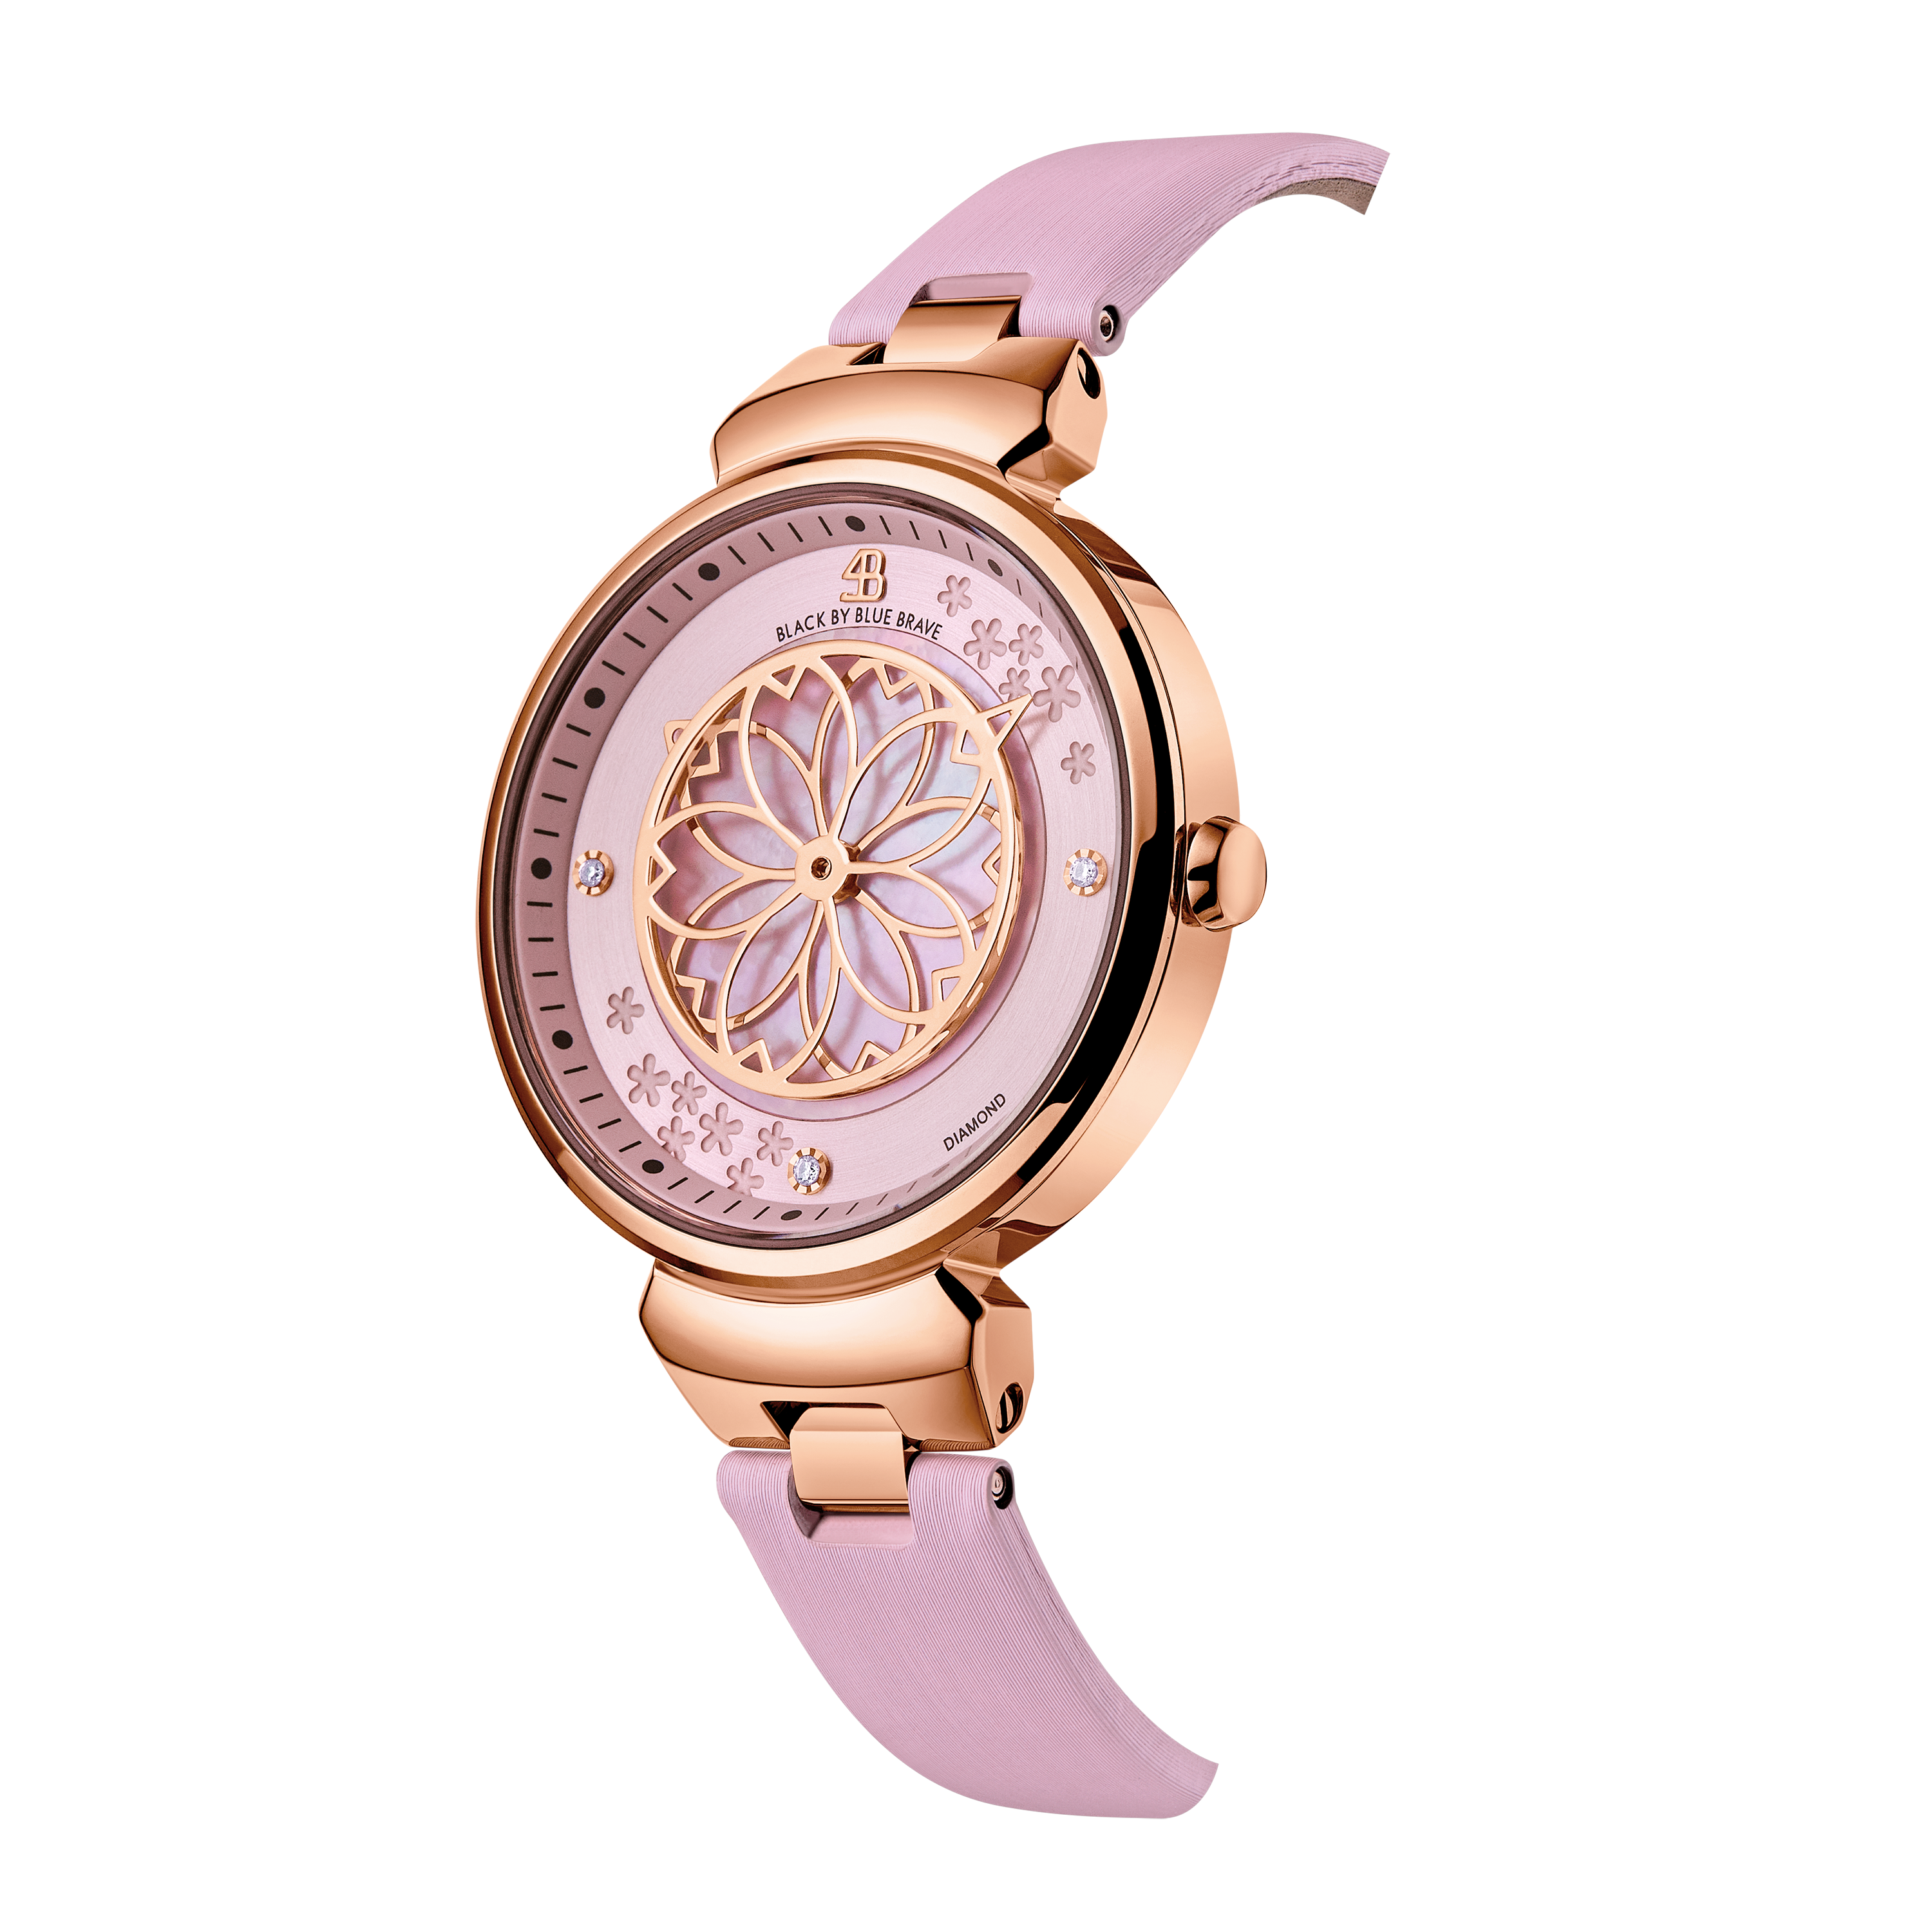 Pink Cherry Blossom Watch With Flower Ceramic Jewelleries (Earrings, Necklace and Bracelet)